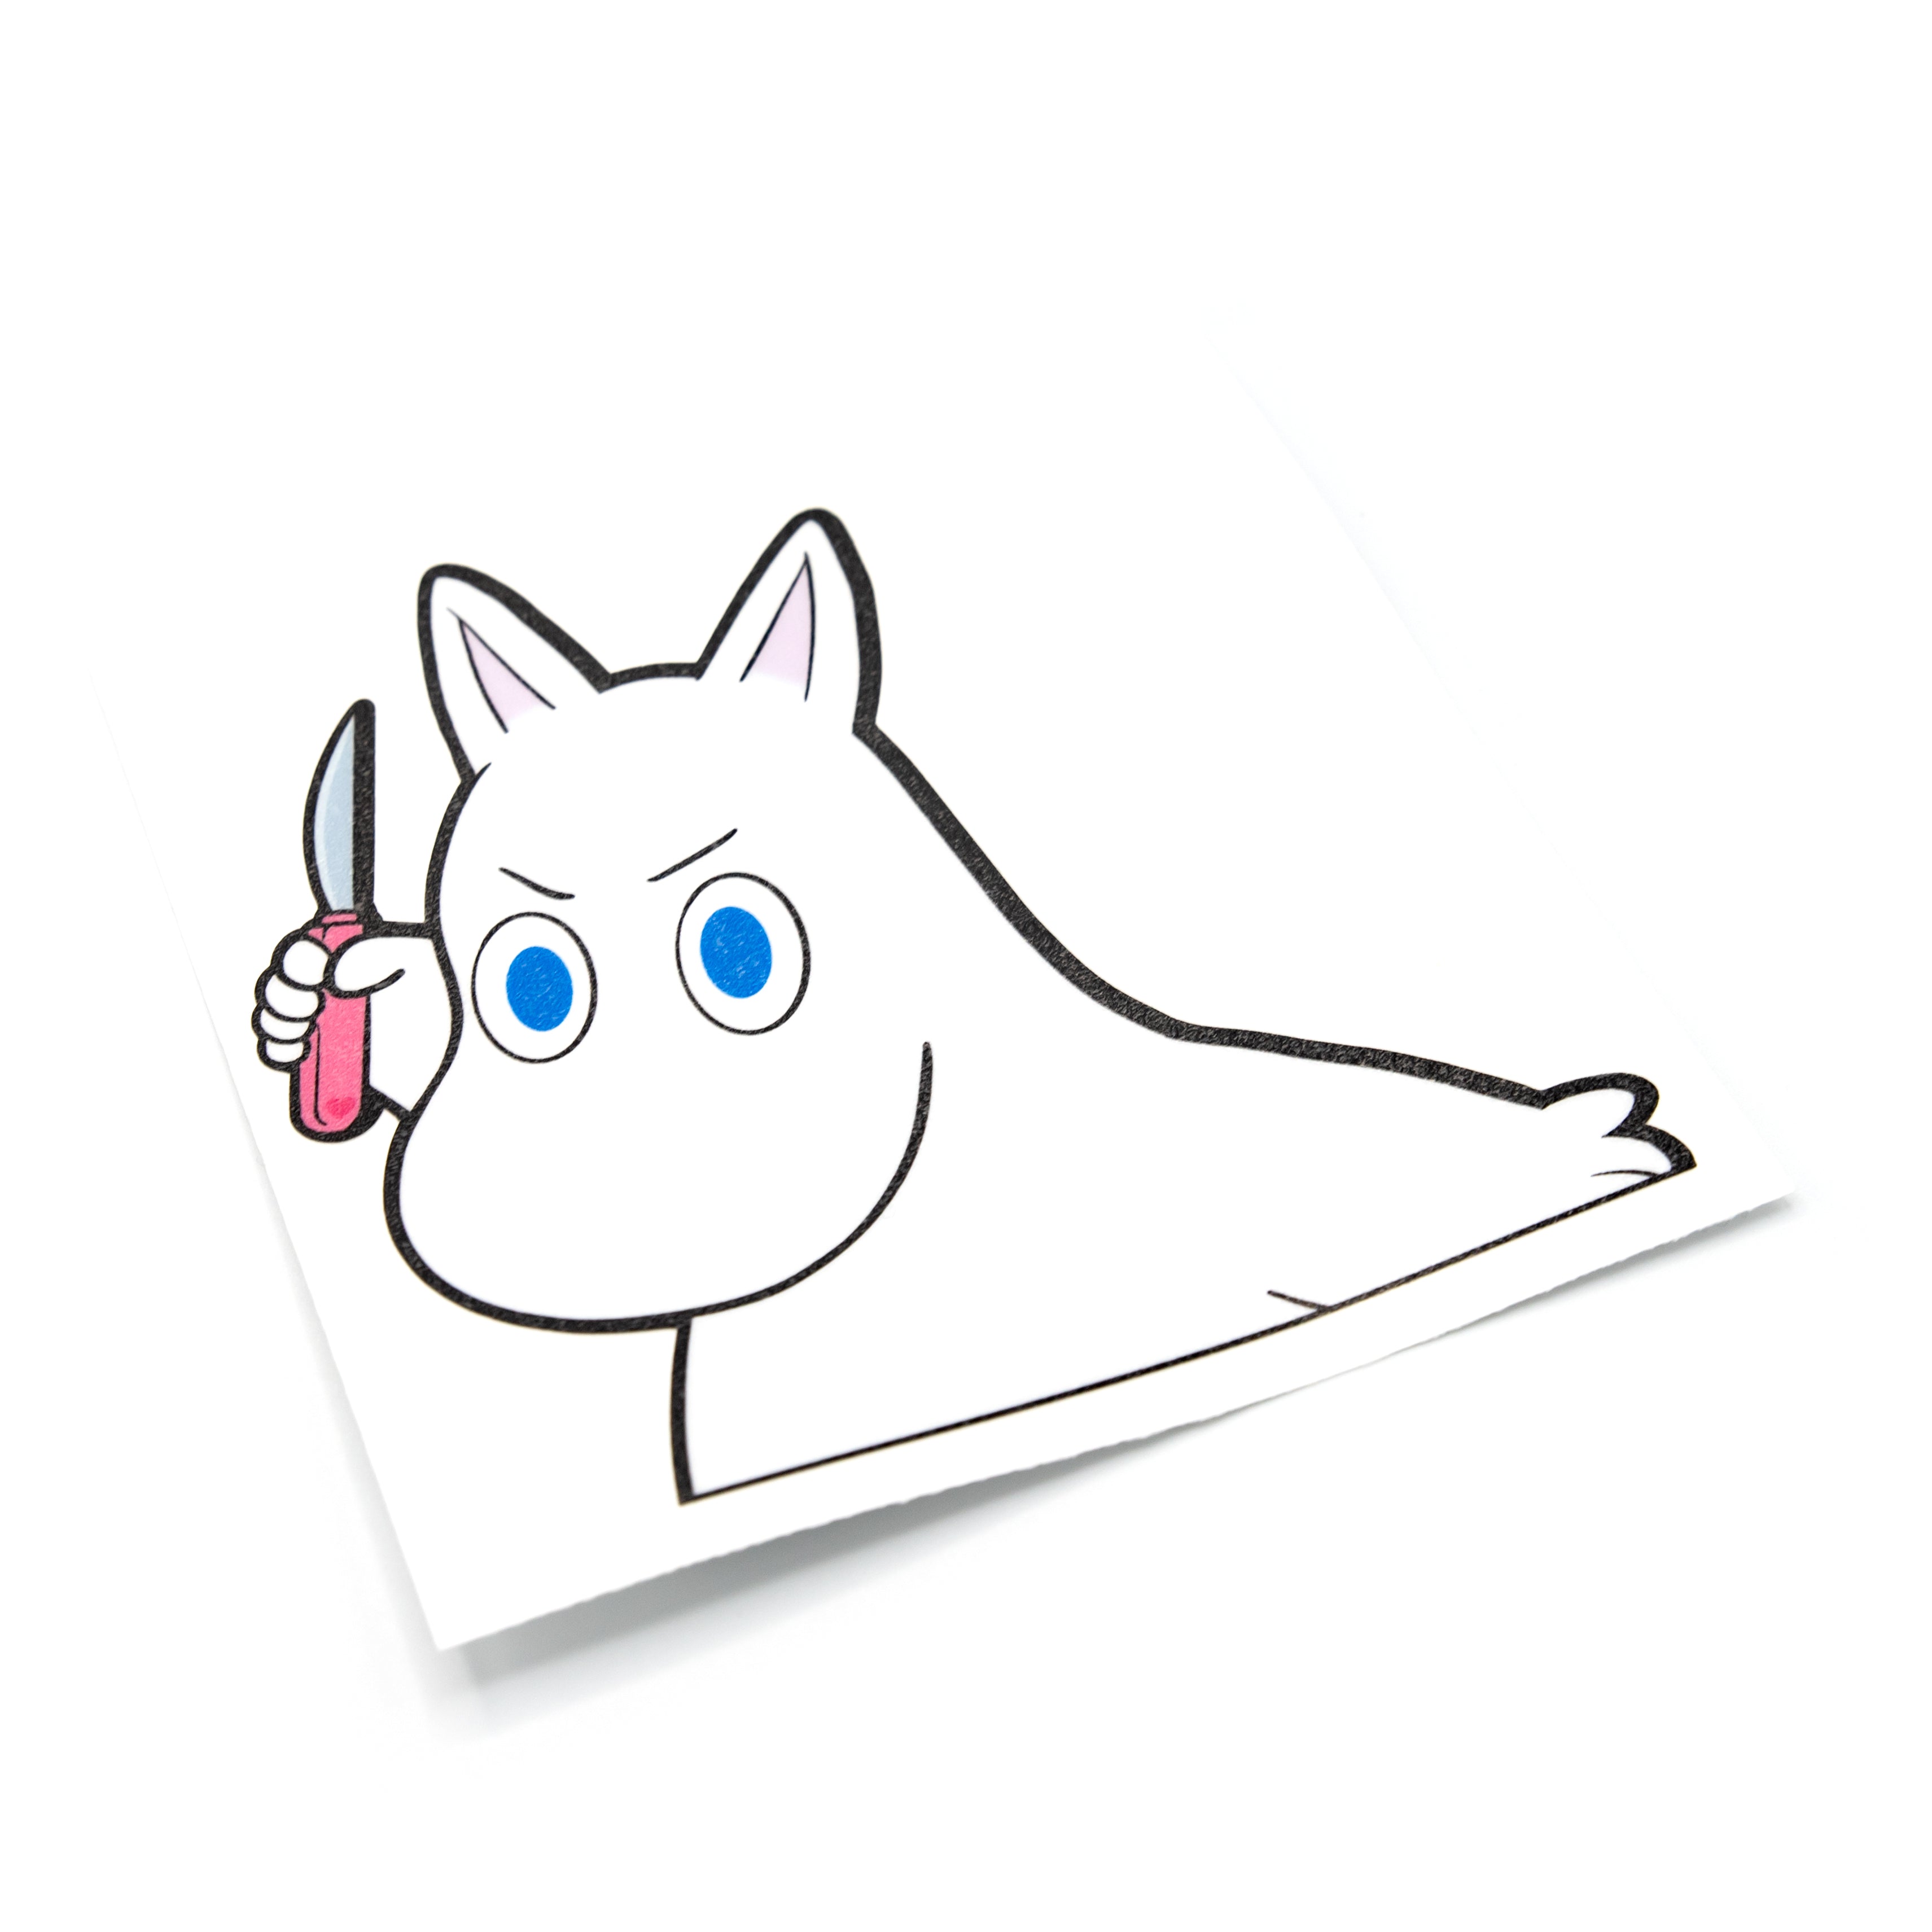 Moomin with a Knife